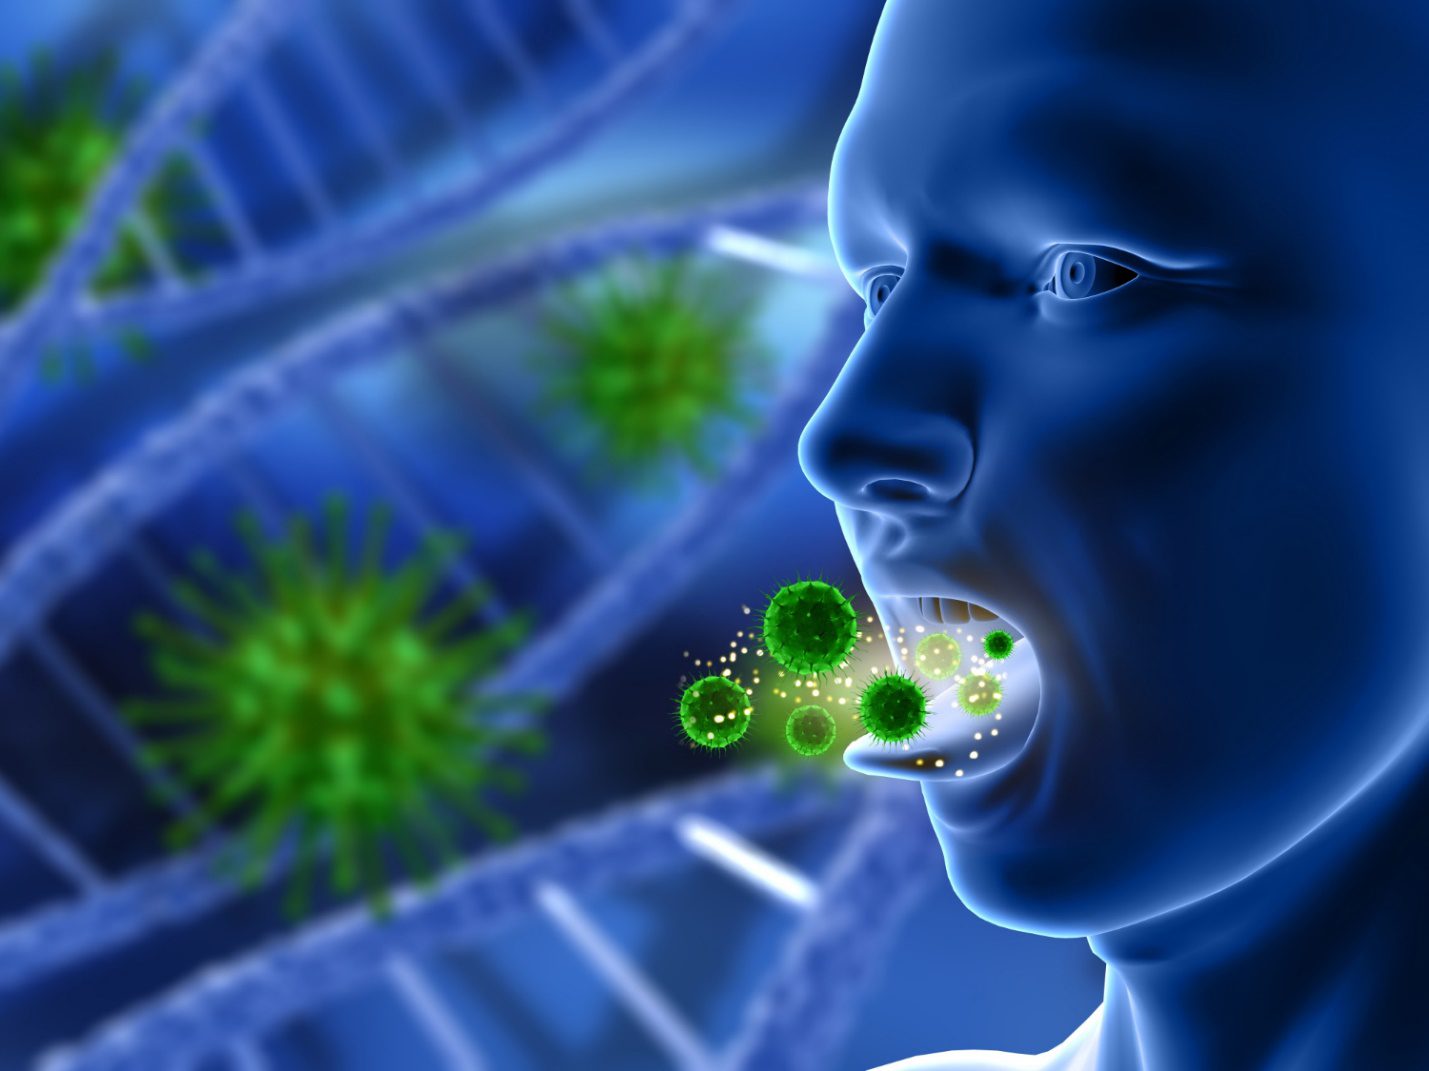 C:\Users\Dell\Downloads\3d-render-male-figure-with-mouth-open-with-virus-cells.jpg